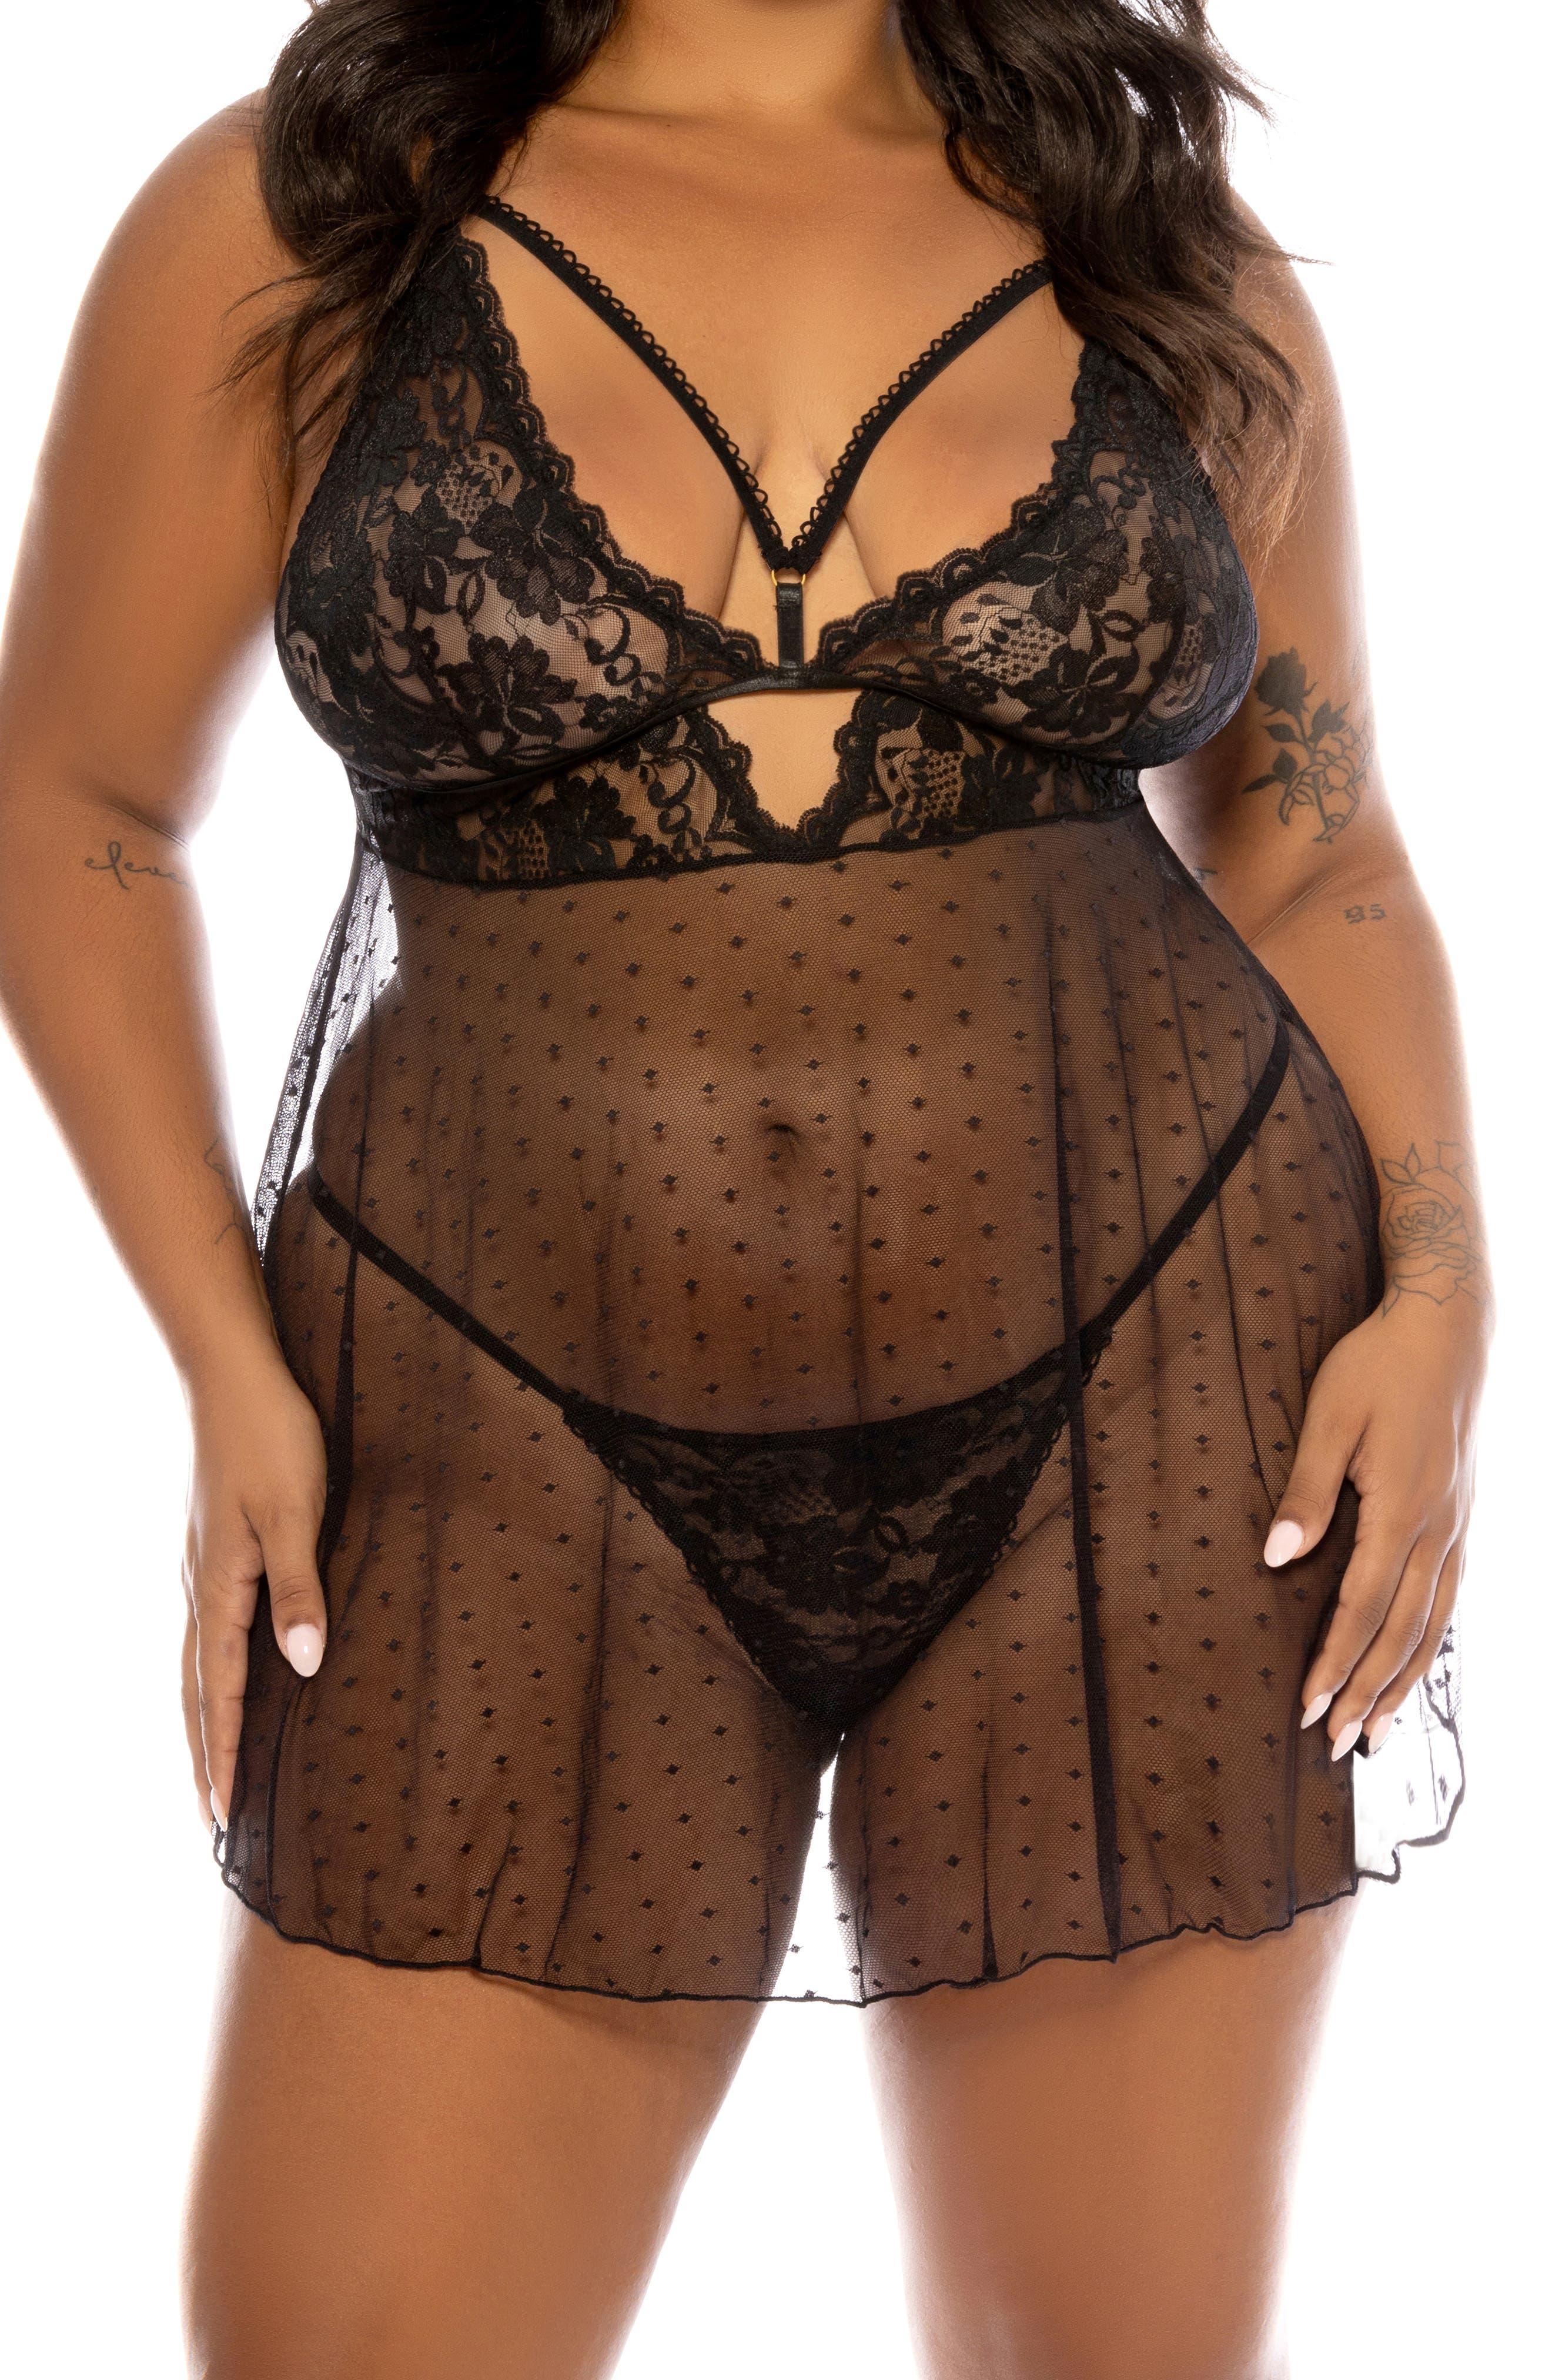 Sheer Cup Lacey Baby Doll & G-String 2pc Lingerie Set